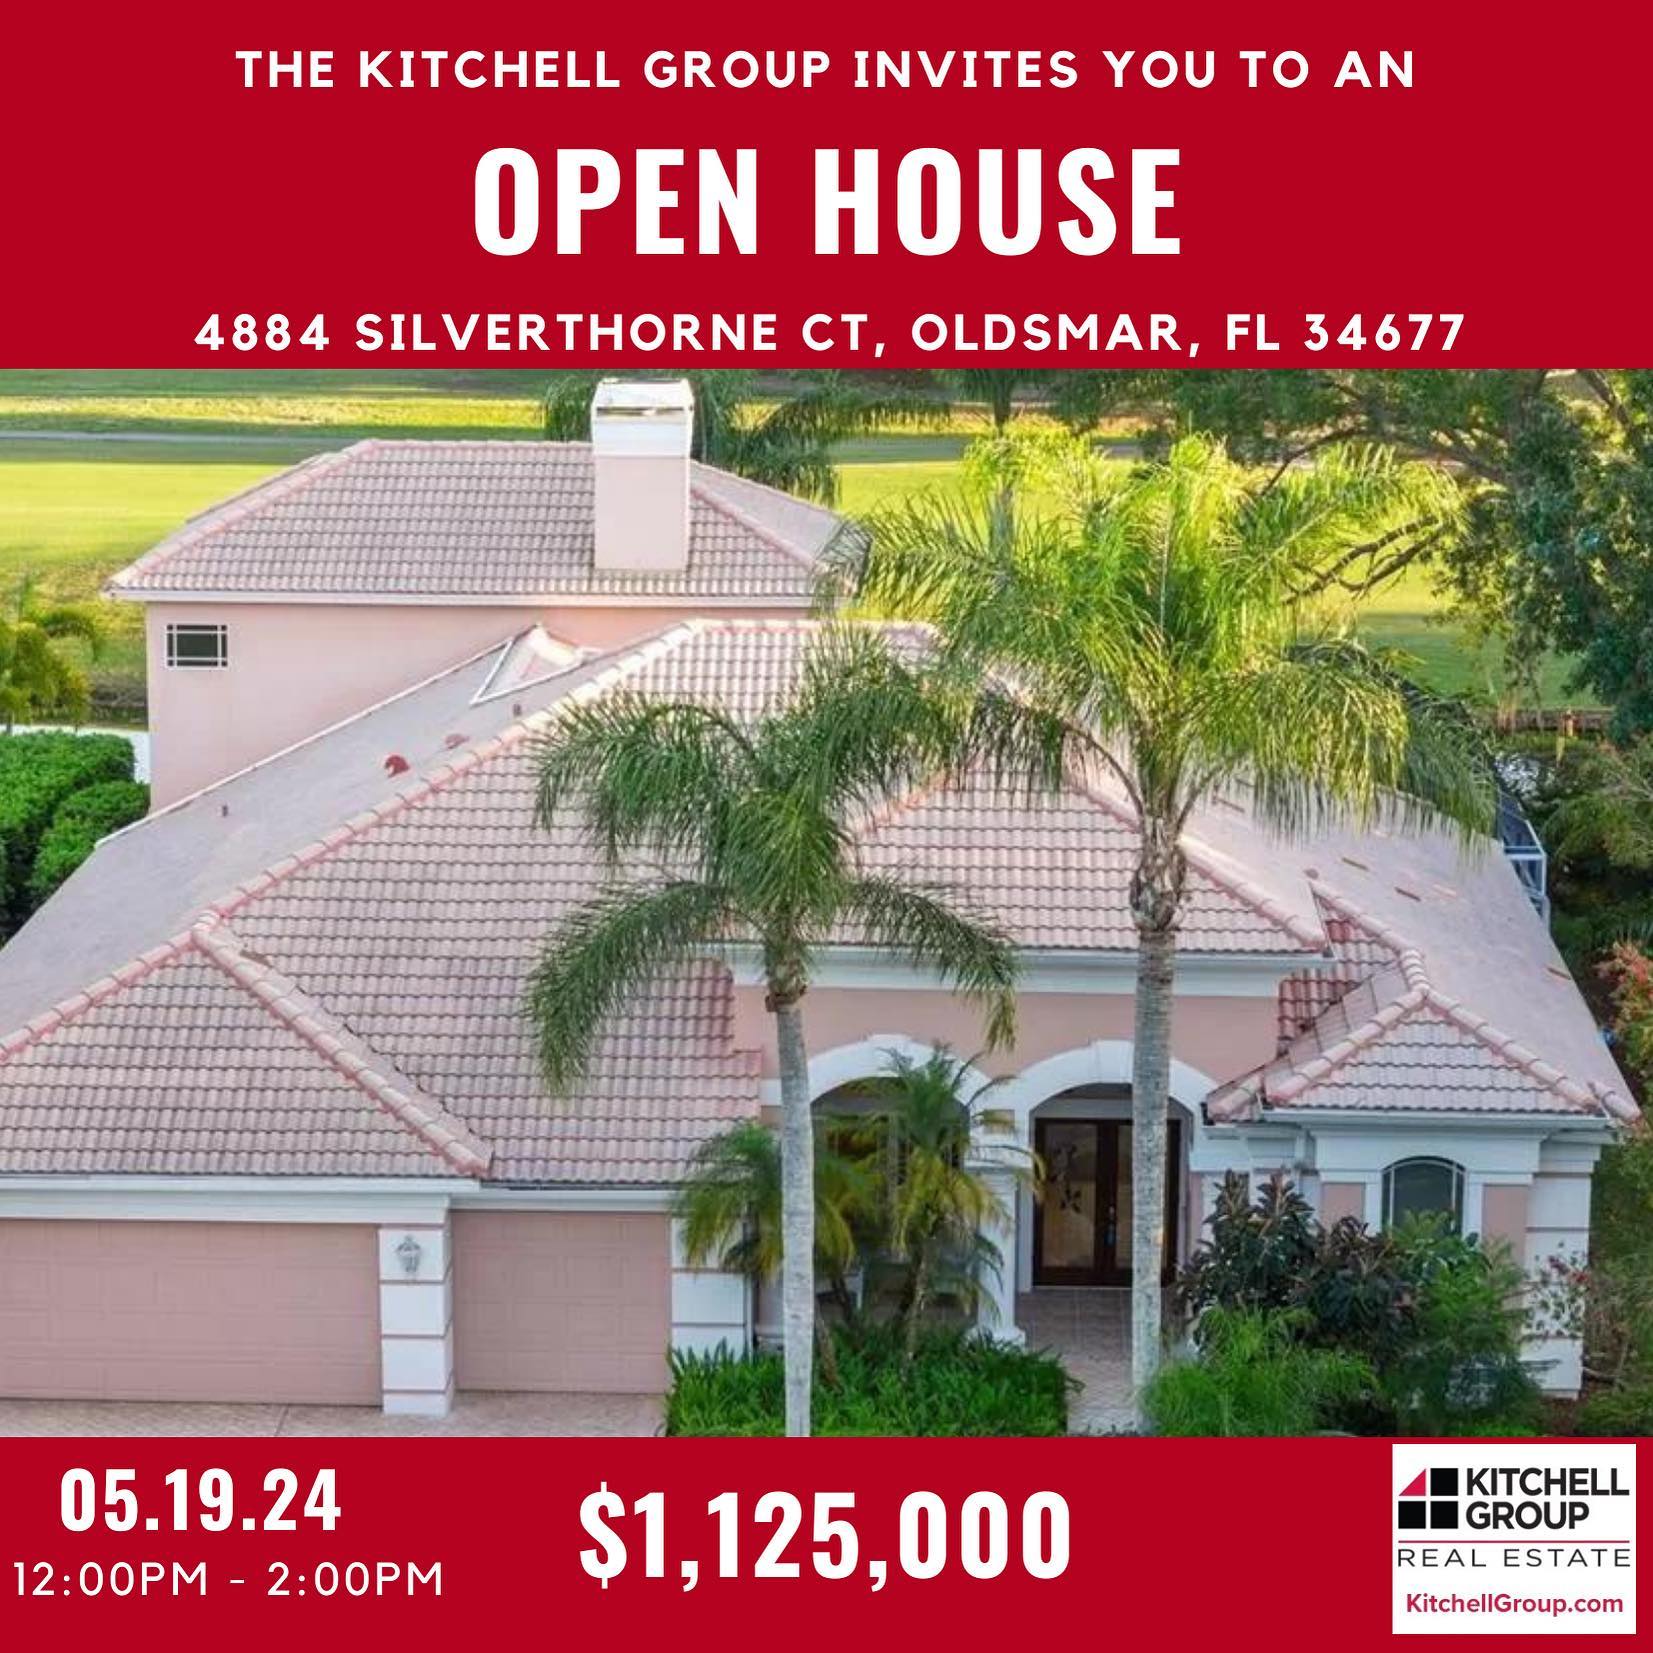 New listing in South Tampa! 4504 S Cortez Ave, Tampa,...